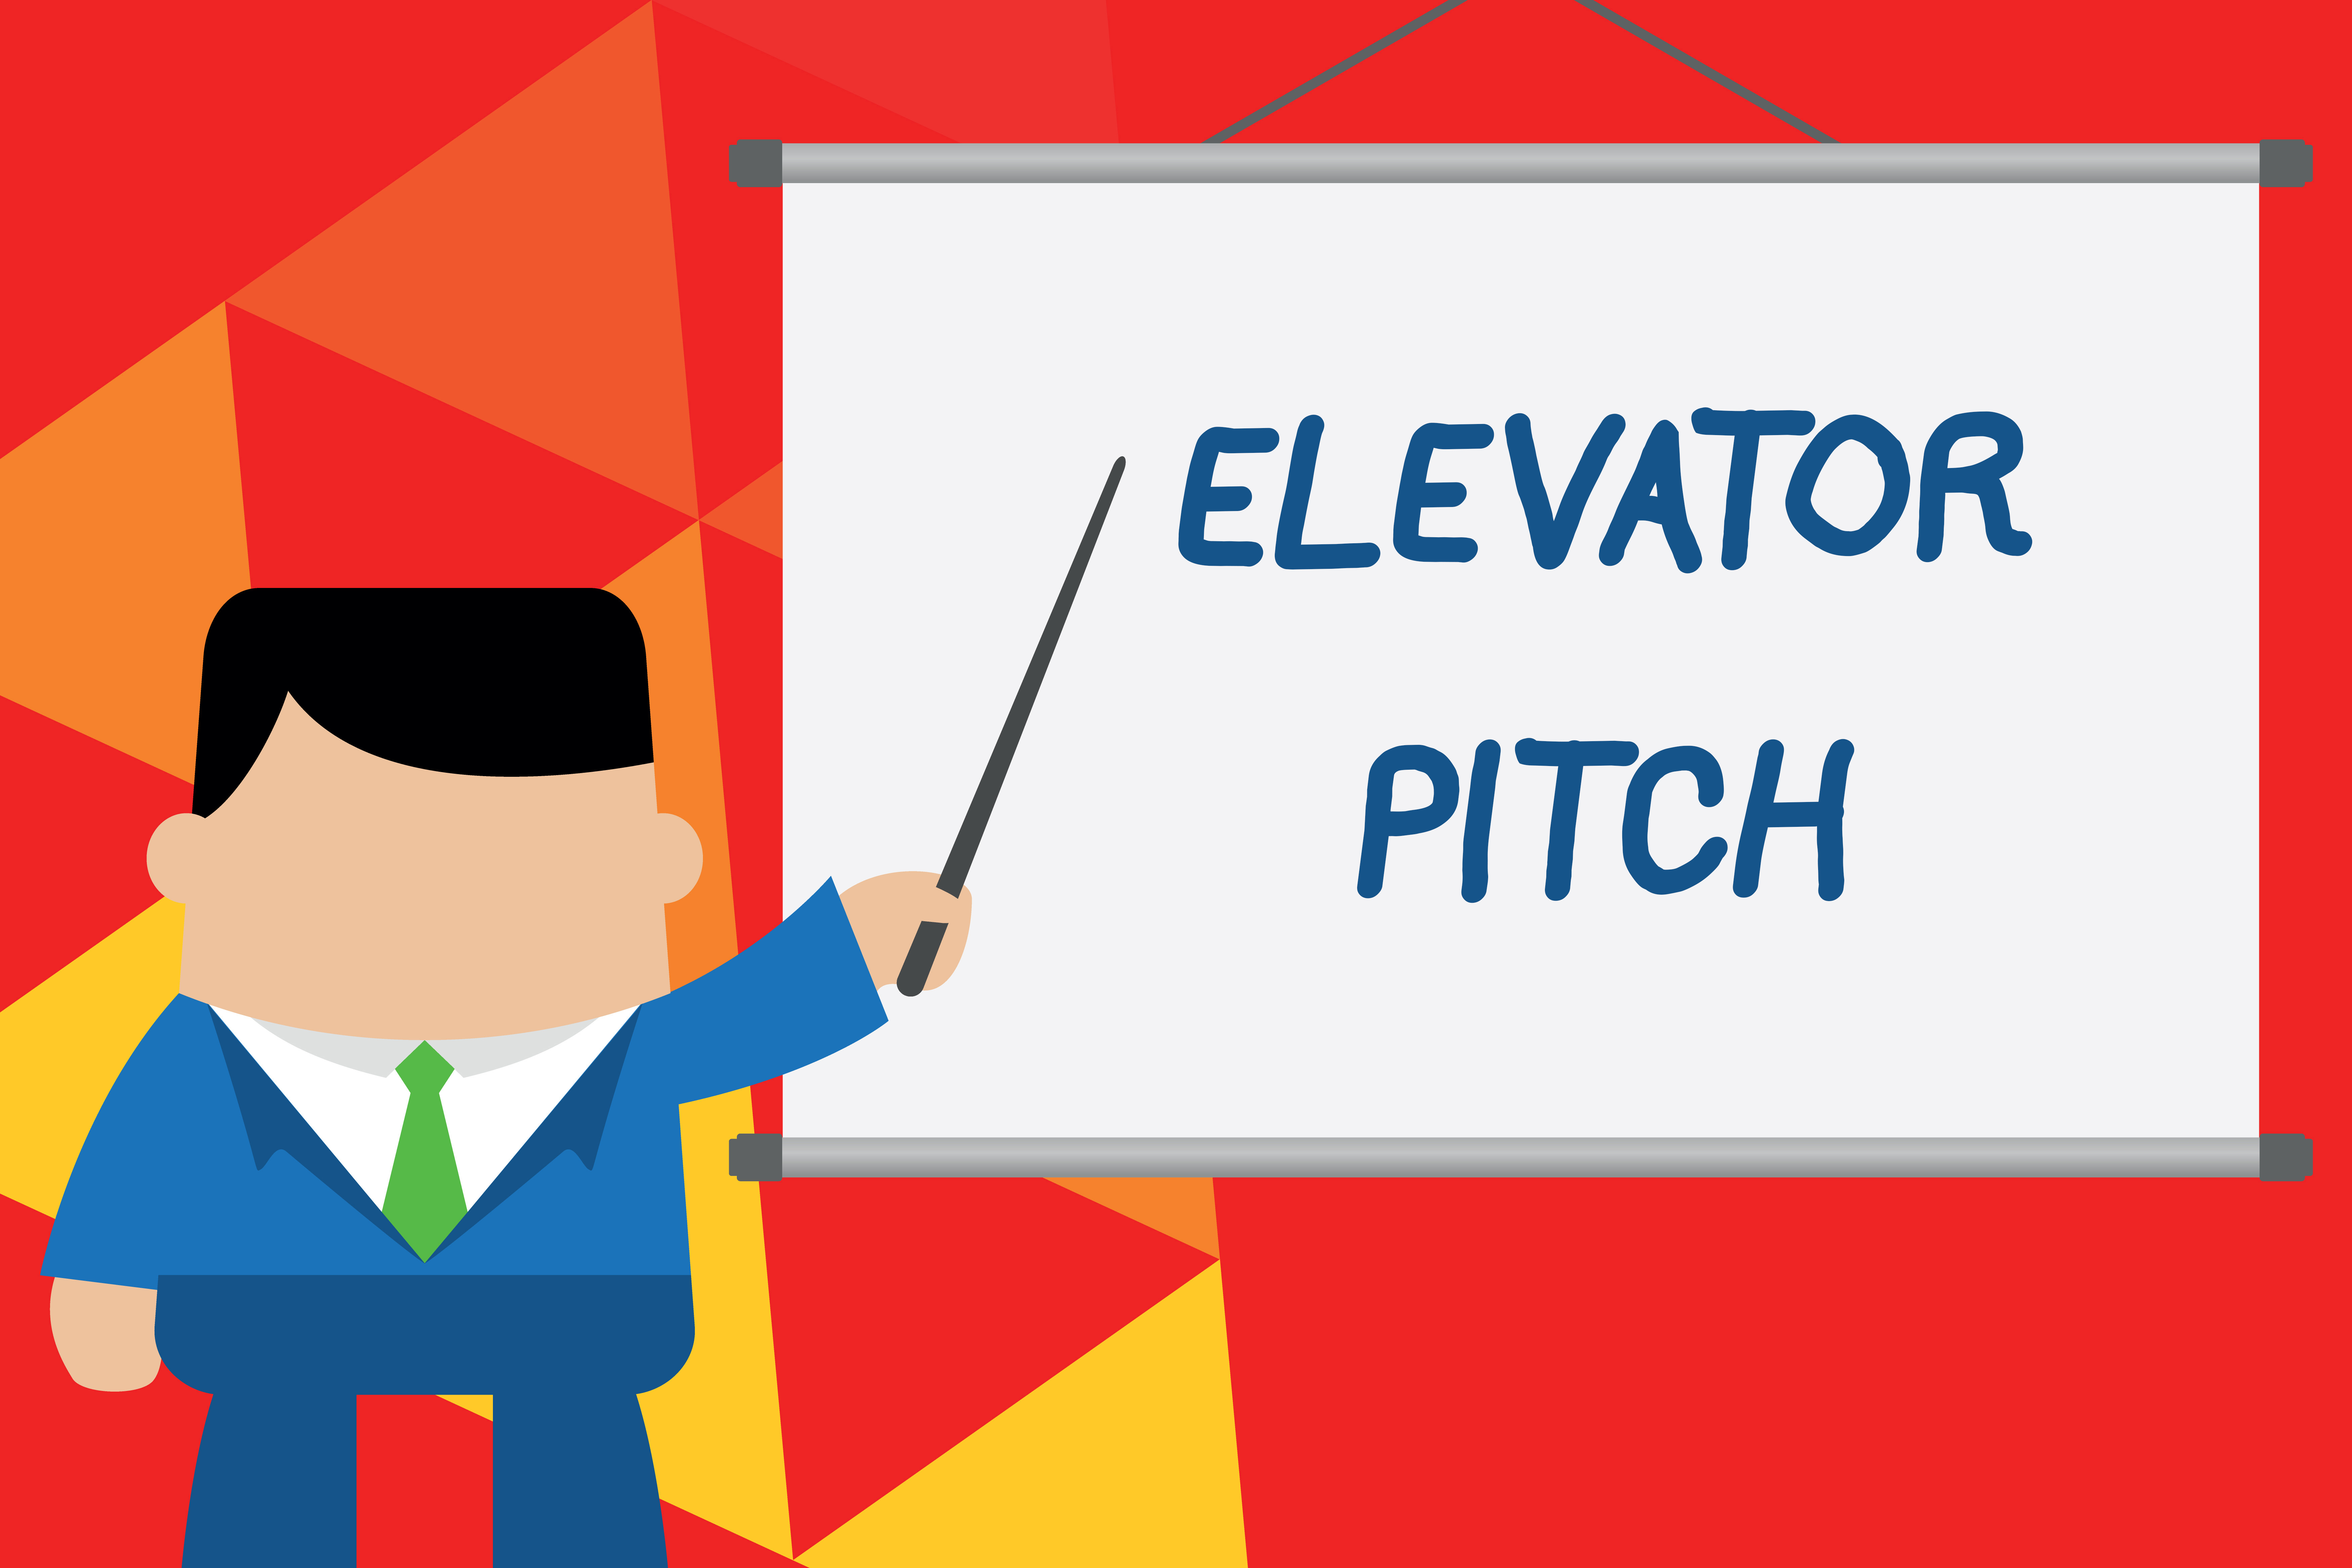 Elevator Pitch: Definition, Uses & Tips